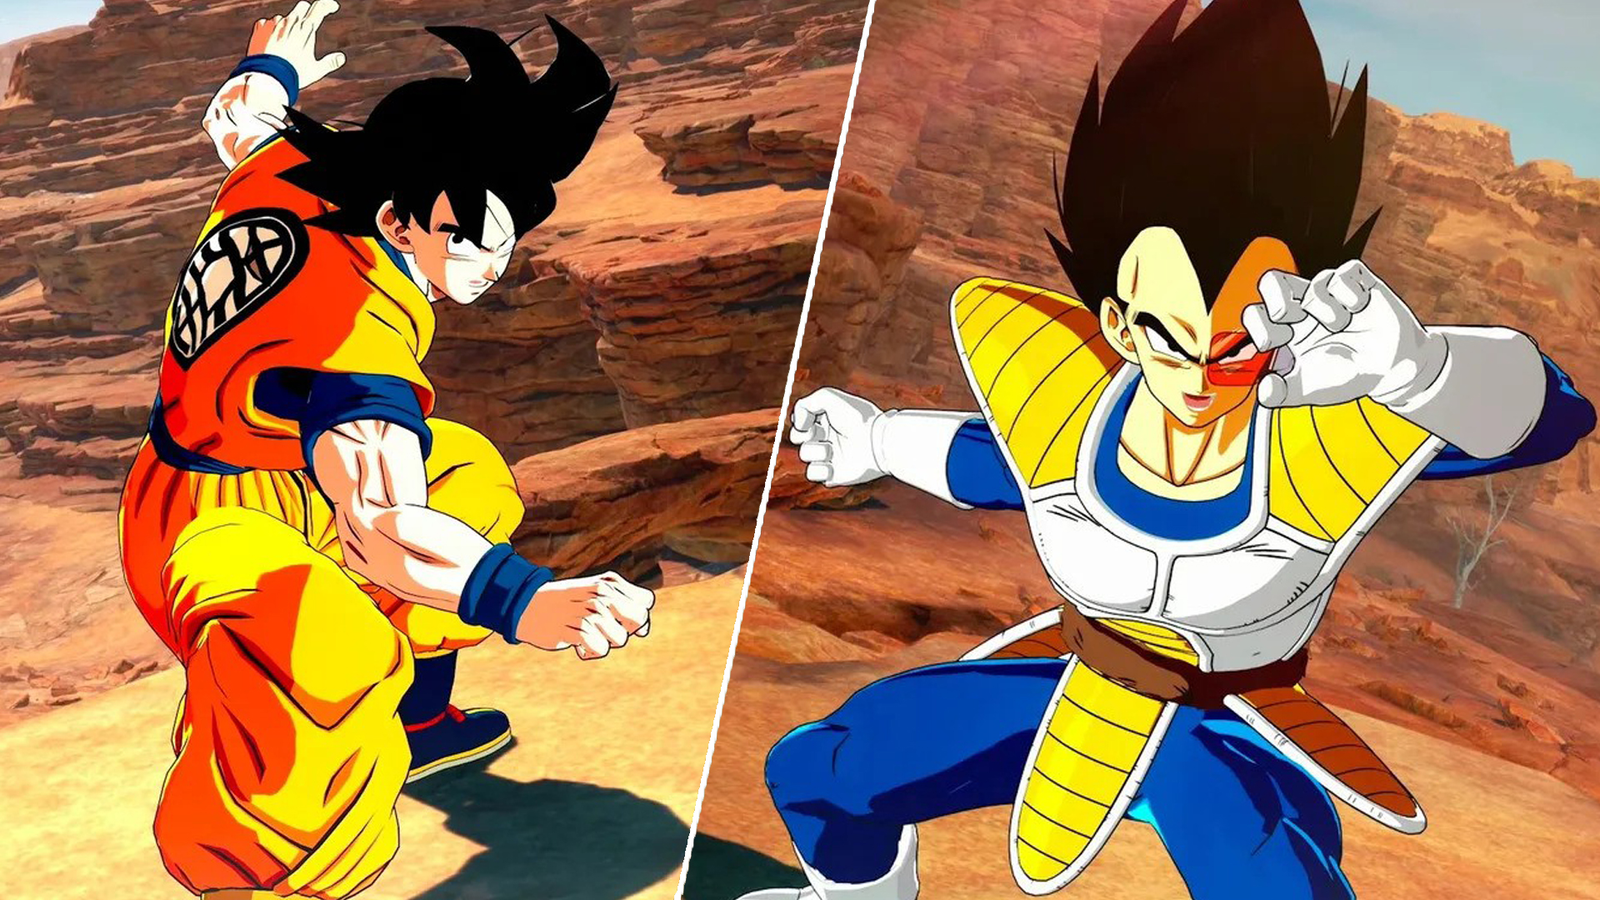 So far, Goku and Vegeta alone make up 24 slots of Dragon Ball: Sparking!  Zero's roster